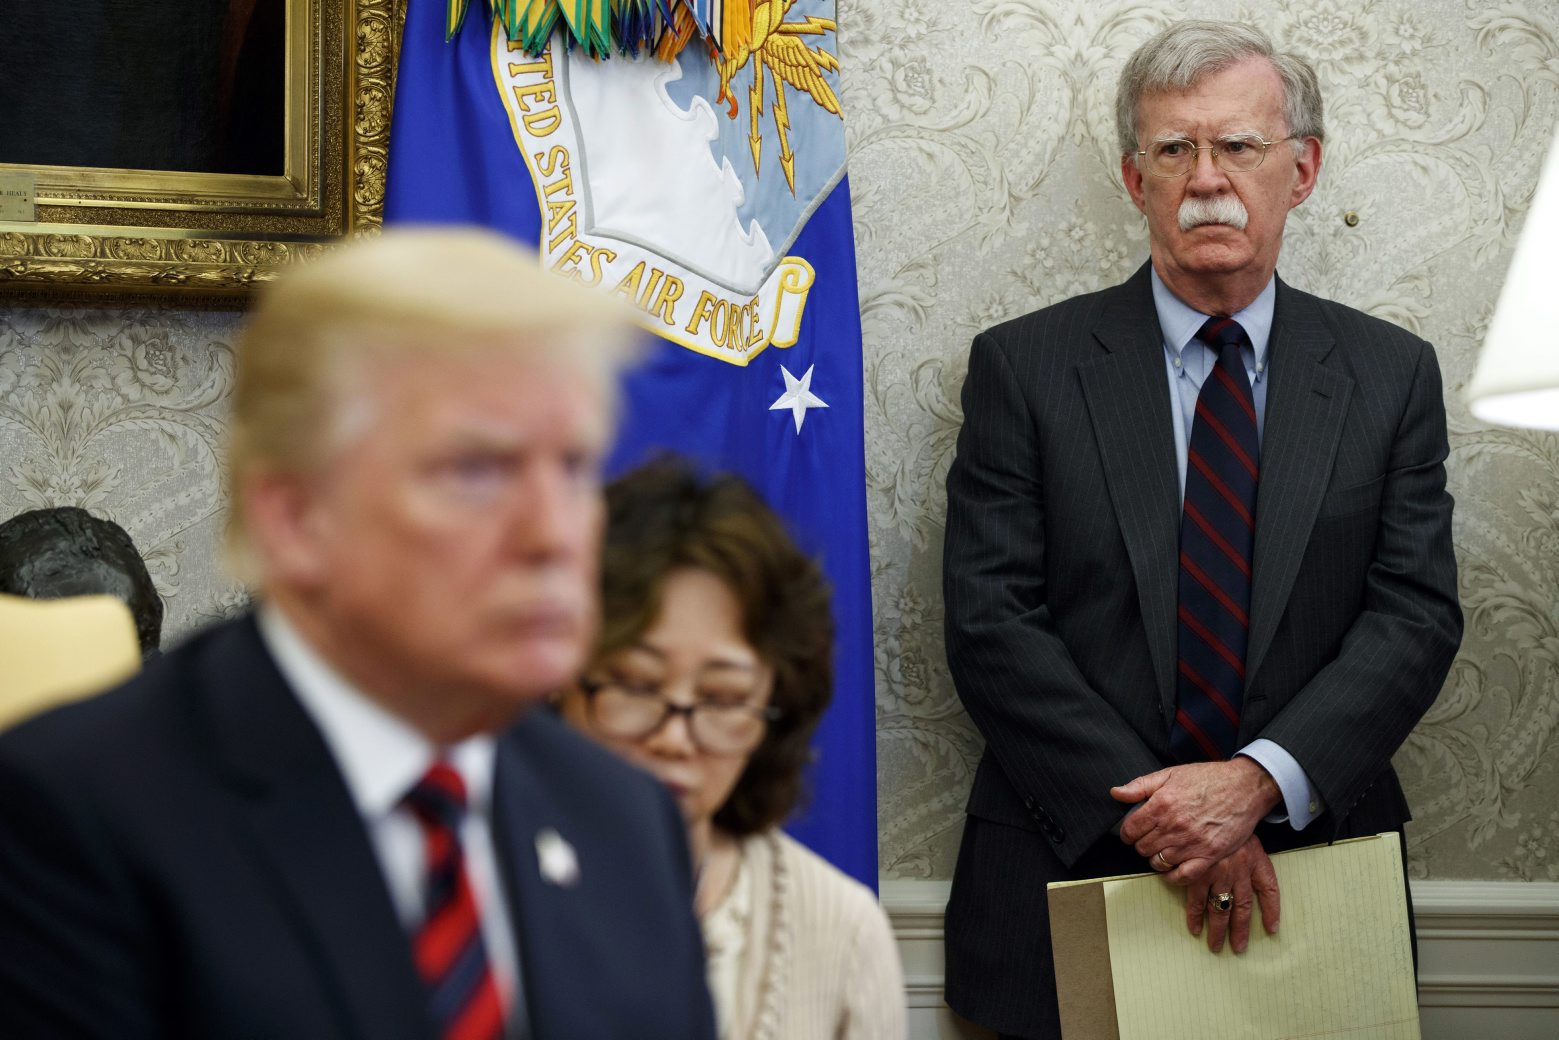 In this May 22, 2018, file photo, U.S. President Donald Trump, left, meets with South Korean President Moon Jae-In in the Oval Office of the White House in Washington, as national security adviser John Bolton, right, watches. Trump says he fired national security adviser John Bolton, says they 'disagreed strongly' on many issues. (AP Photo/Evan Vucci, File)
Donald Trump,John Bolton Trump Bolton